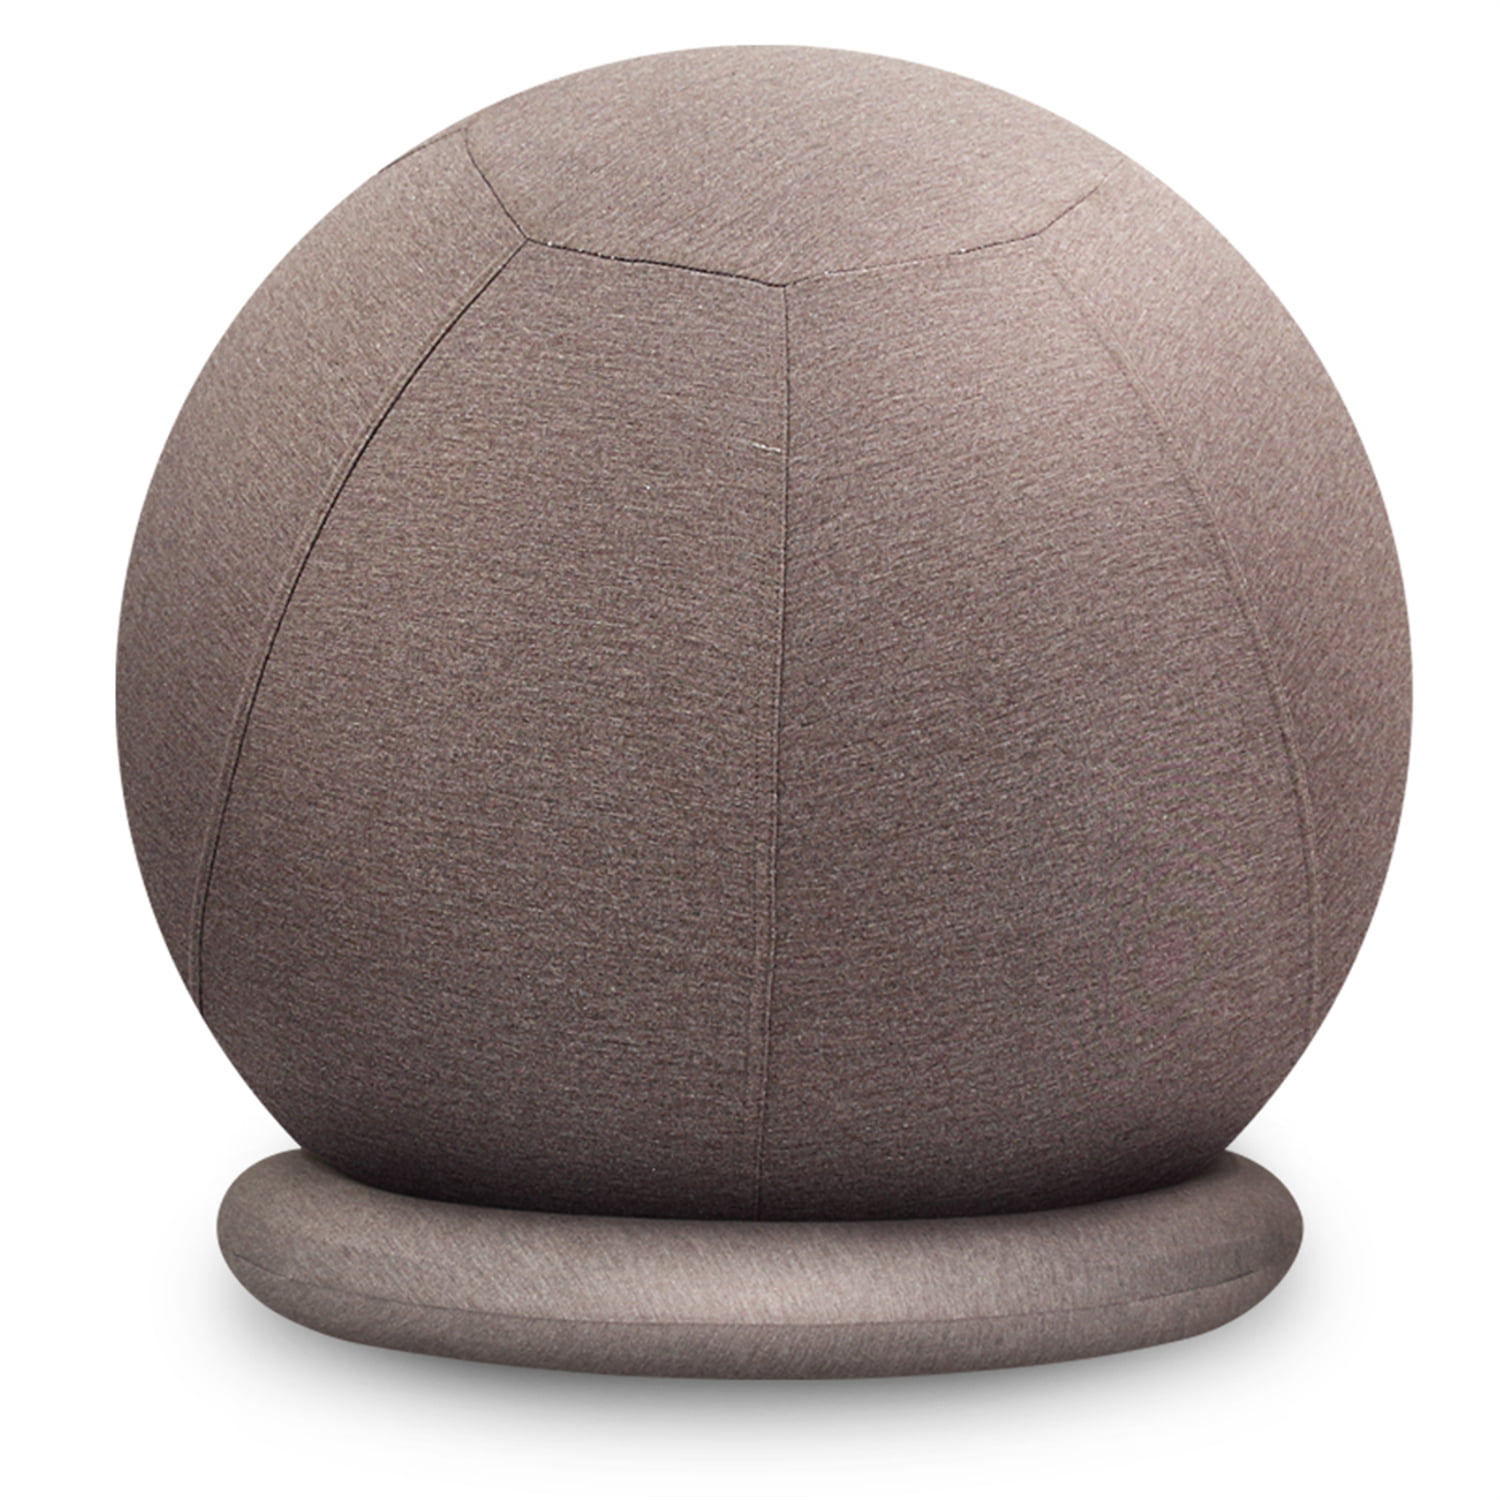 Yoga Ball Chair Exercise Ball Chair with Slipcover and Base for Home Office Desk Enovi ProBalanceΩ Ball Chair Stability Ball & Balance Ball Seat to Relieve Back Pain Multiple color size Birthing & Pregnancy 